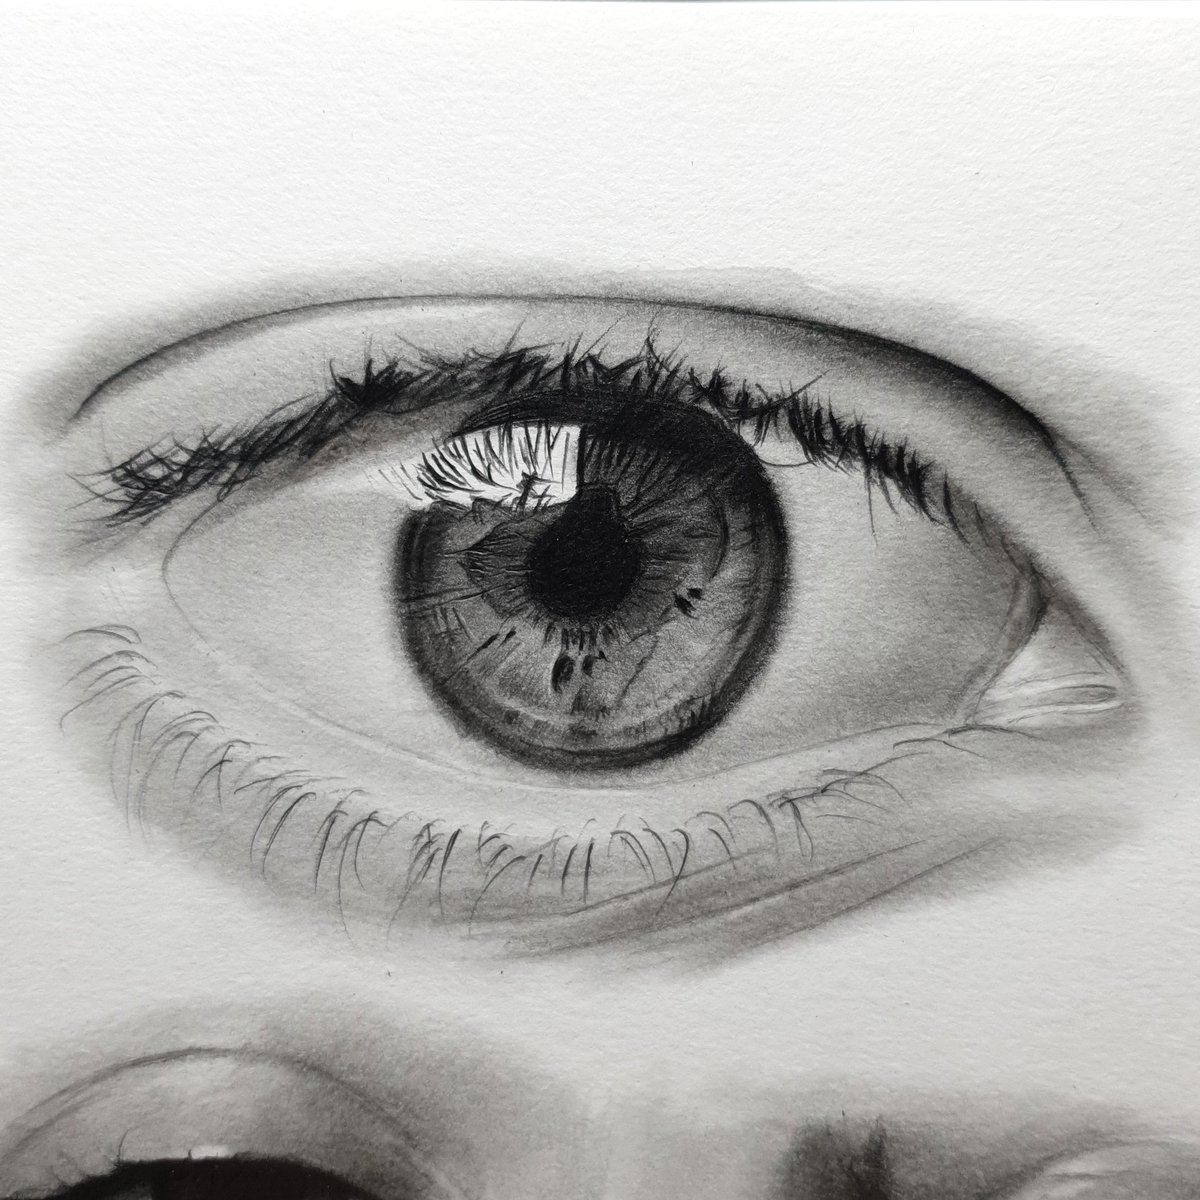 💫 Another eye study sketch using graphite pencils, paying close attention to the reflection in the iris. ✏️ 

#eyedrawing #sketch #pencilart #tuesdayvibes #art #artwork #realismart